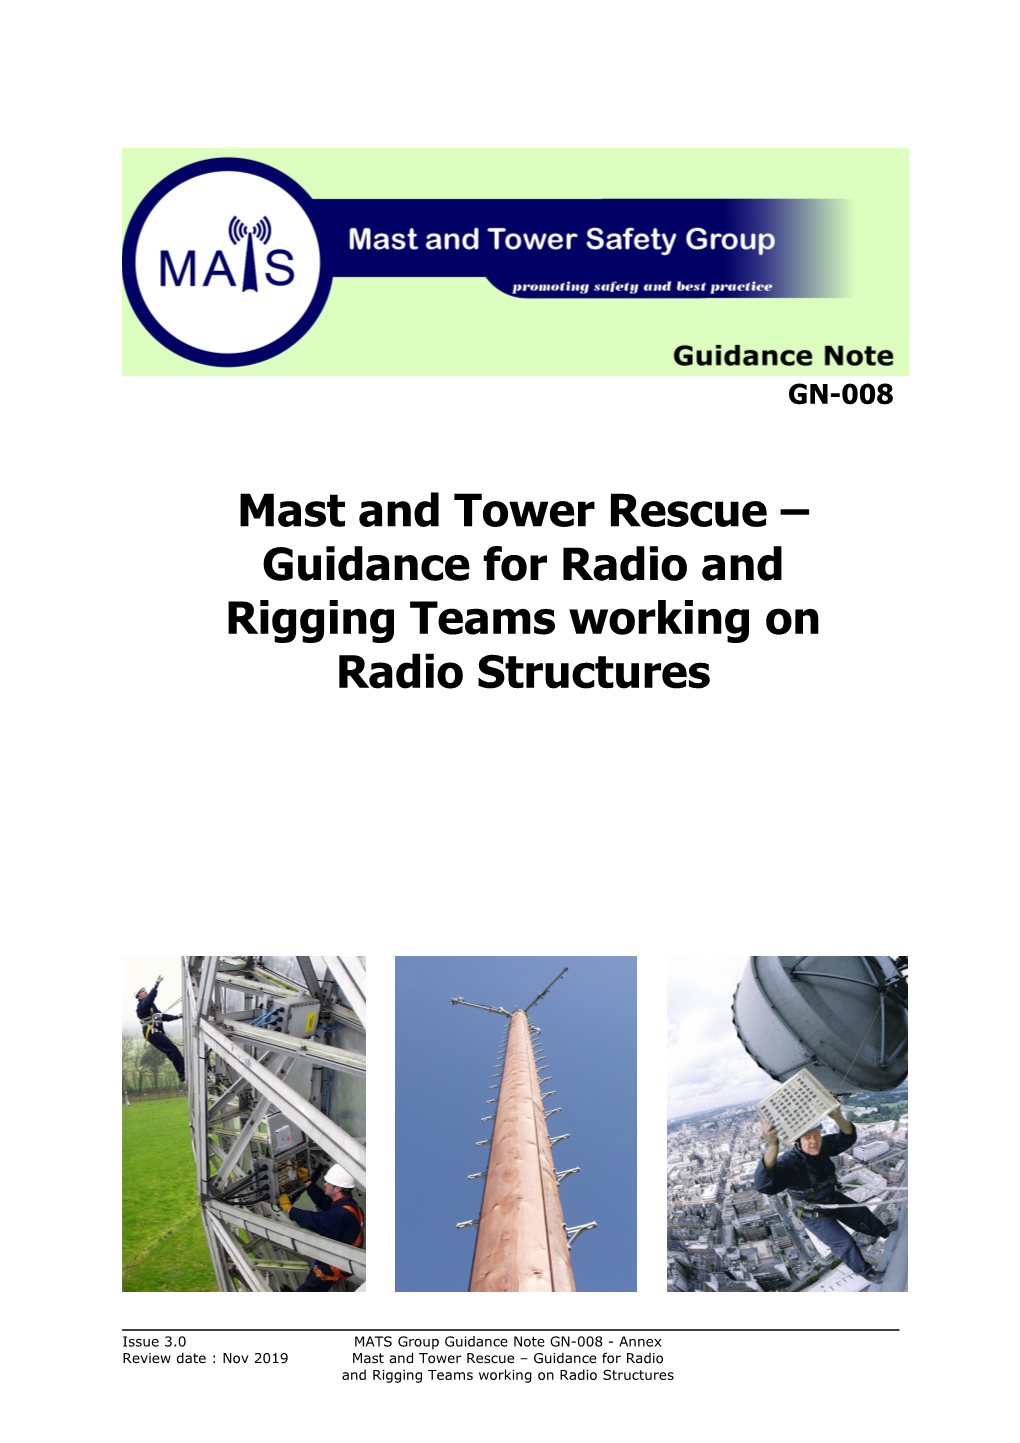 Mast and Tower Rescue Guidance for Radio and Rigging Teams Working on Radio Structures